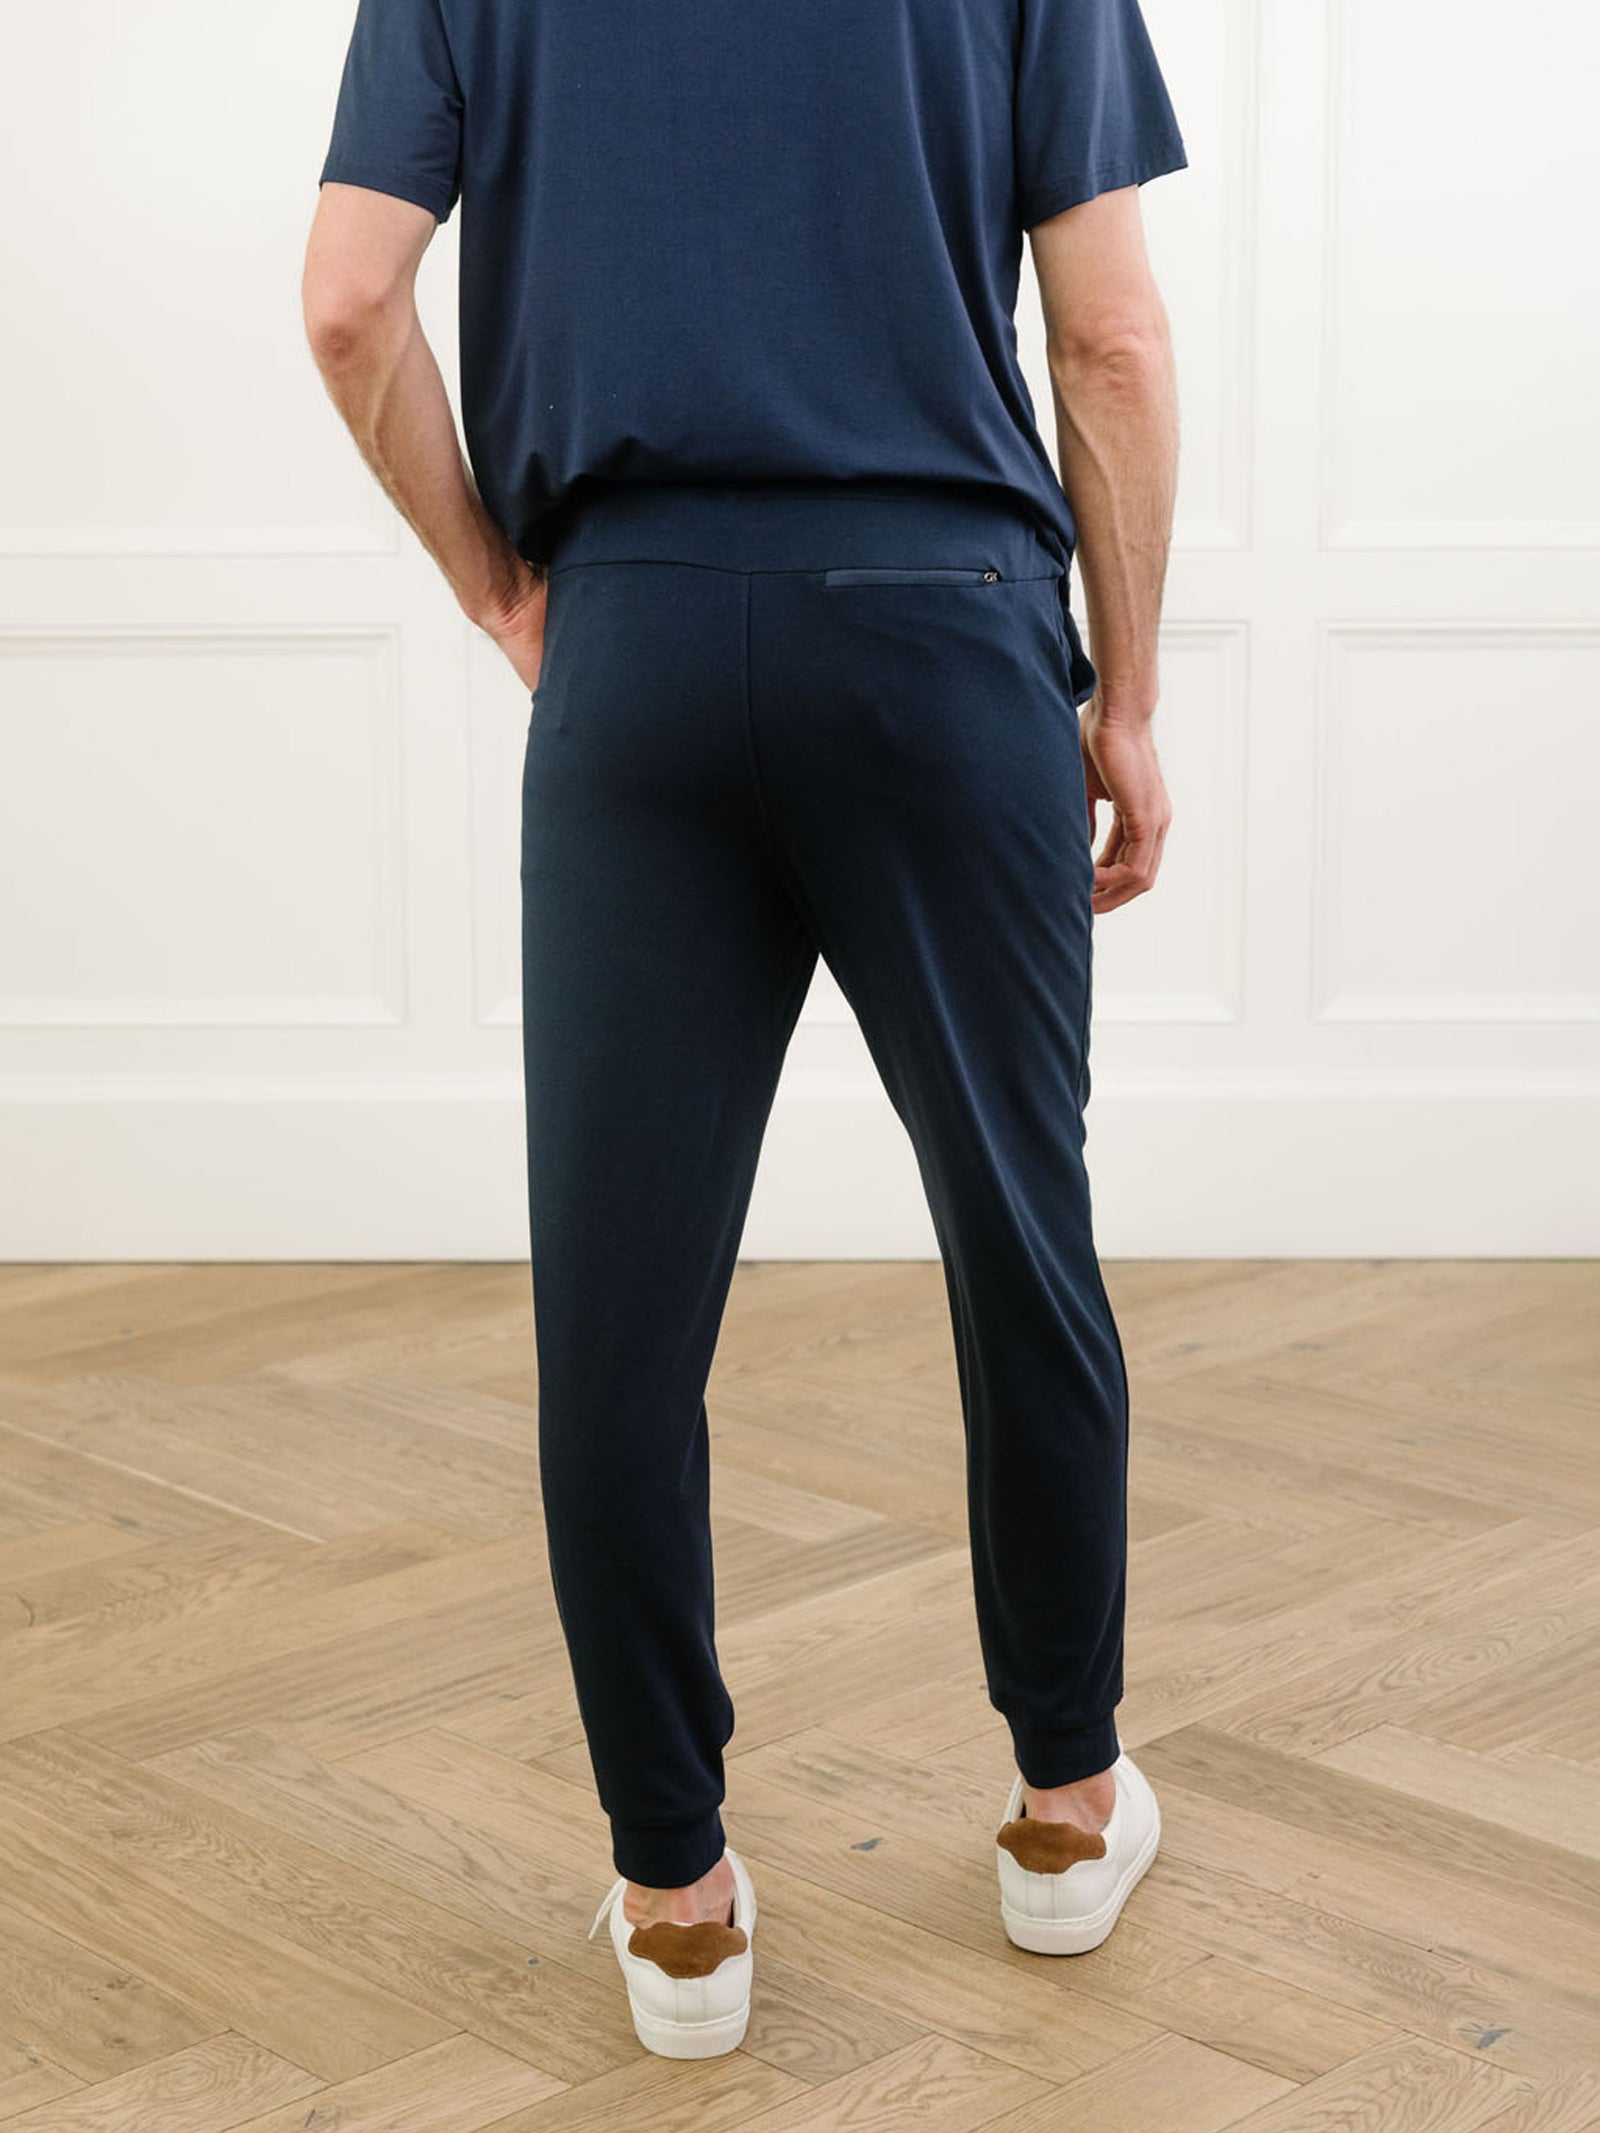 Navy Men's Bamboo Jogger Set. There is a man wearing the jogger set. He is standing in a well lit room in a home.